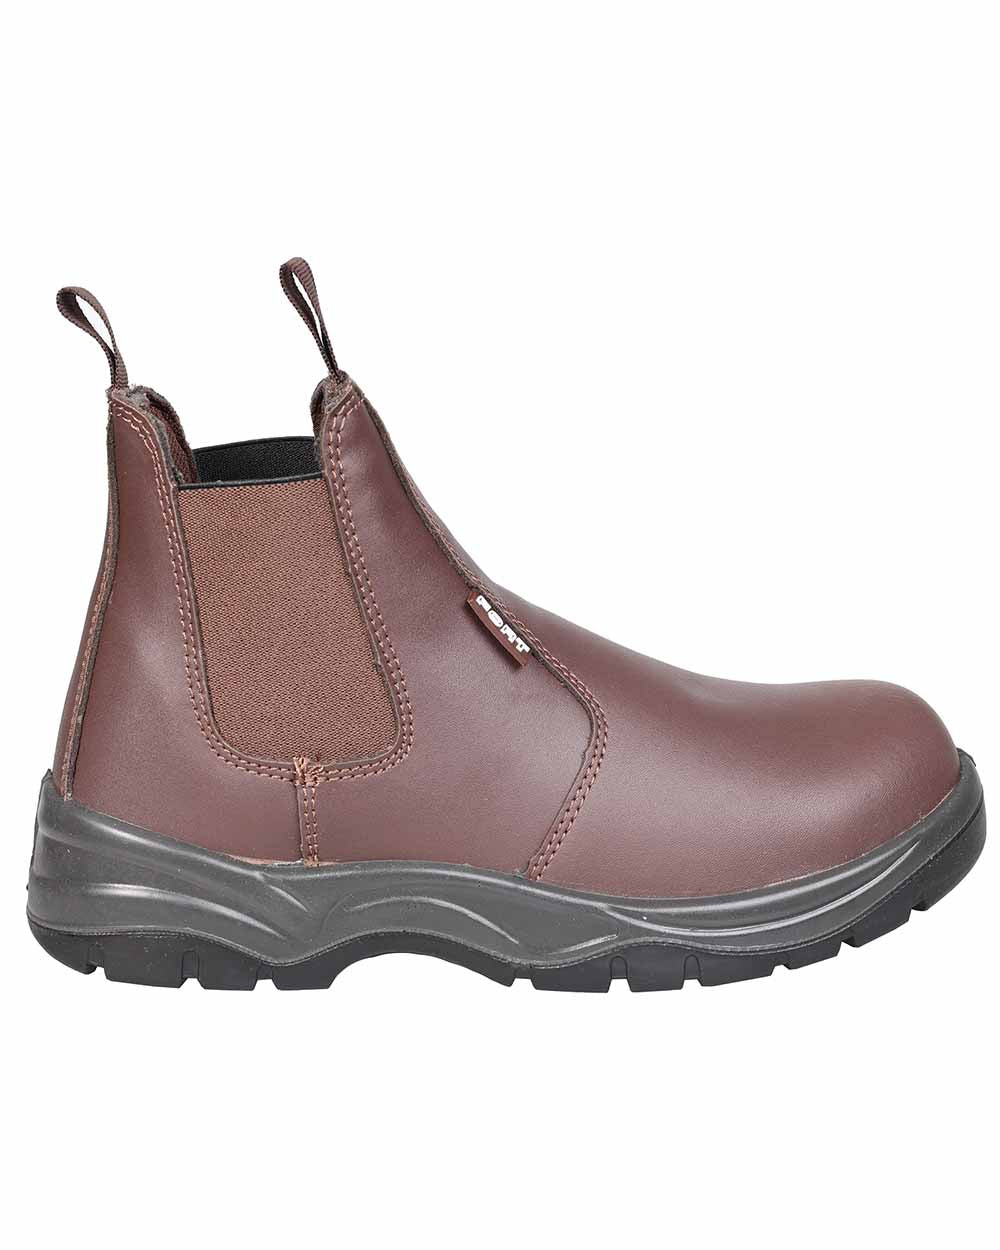 Elastic gusset view Fort Nelson Safety Dealer Boots Steel toe 